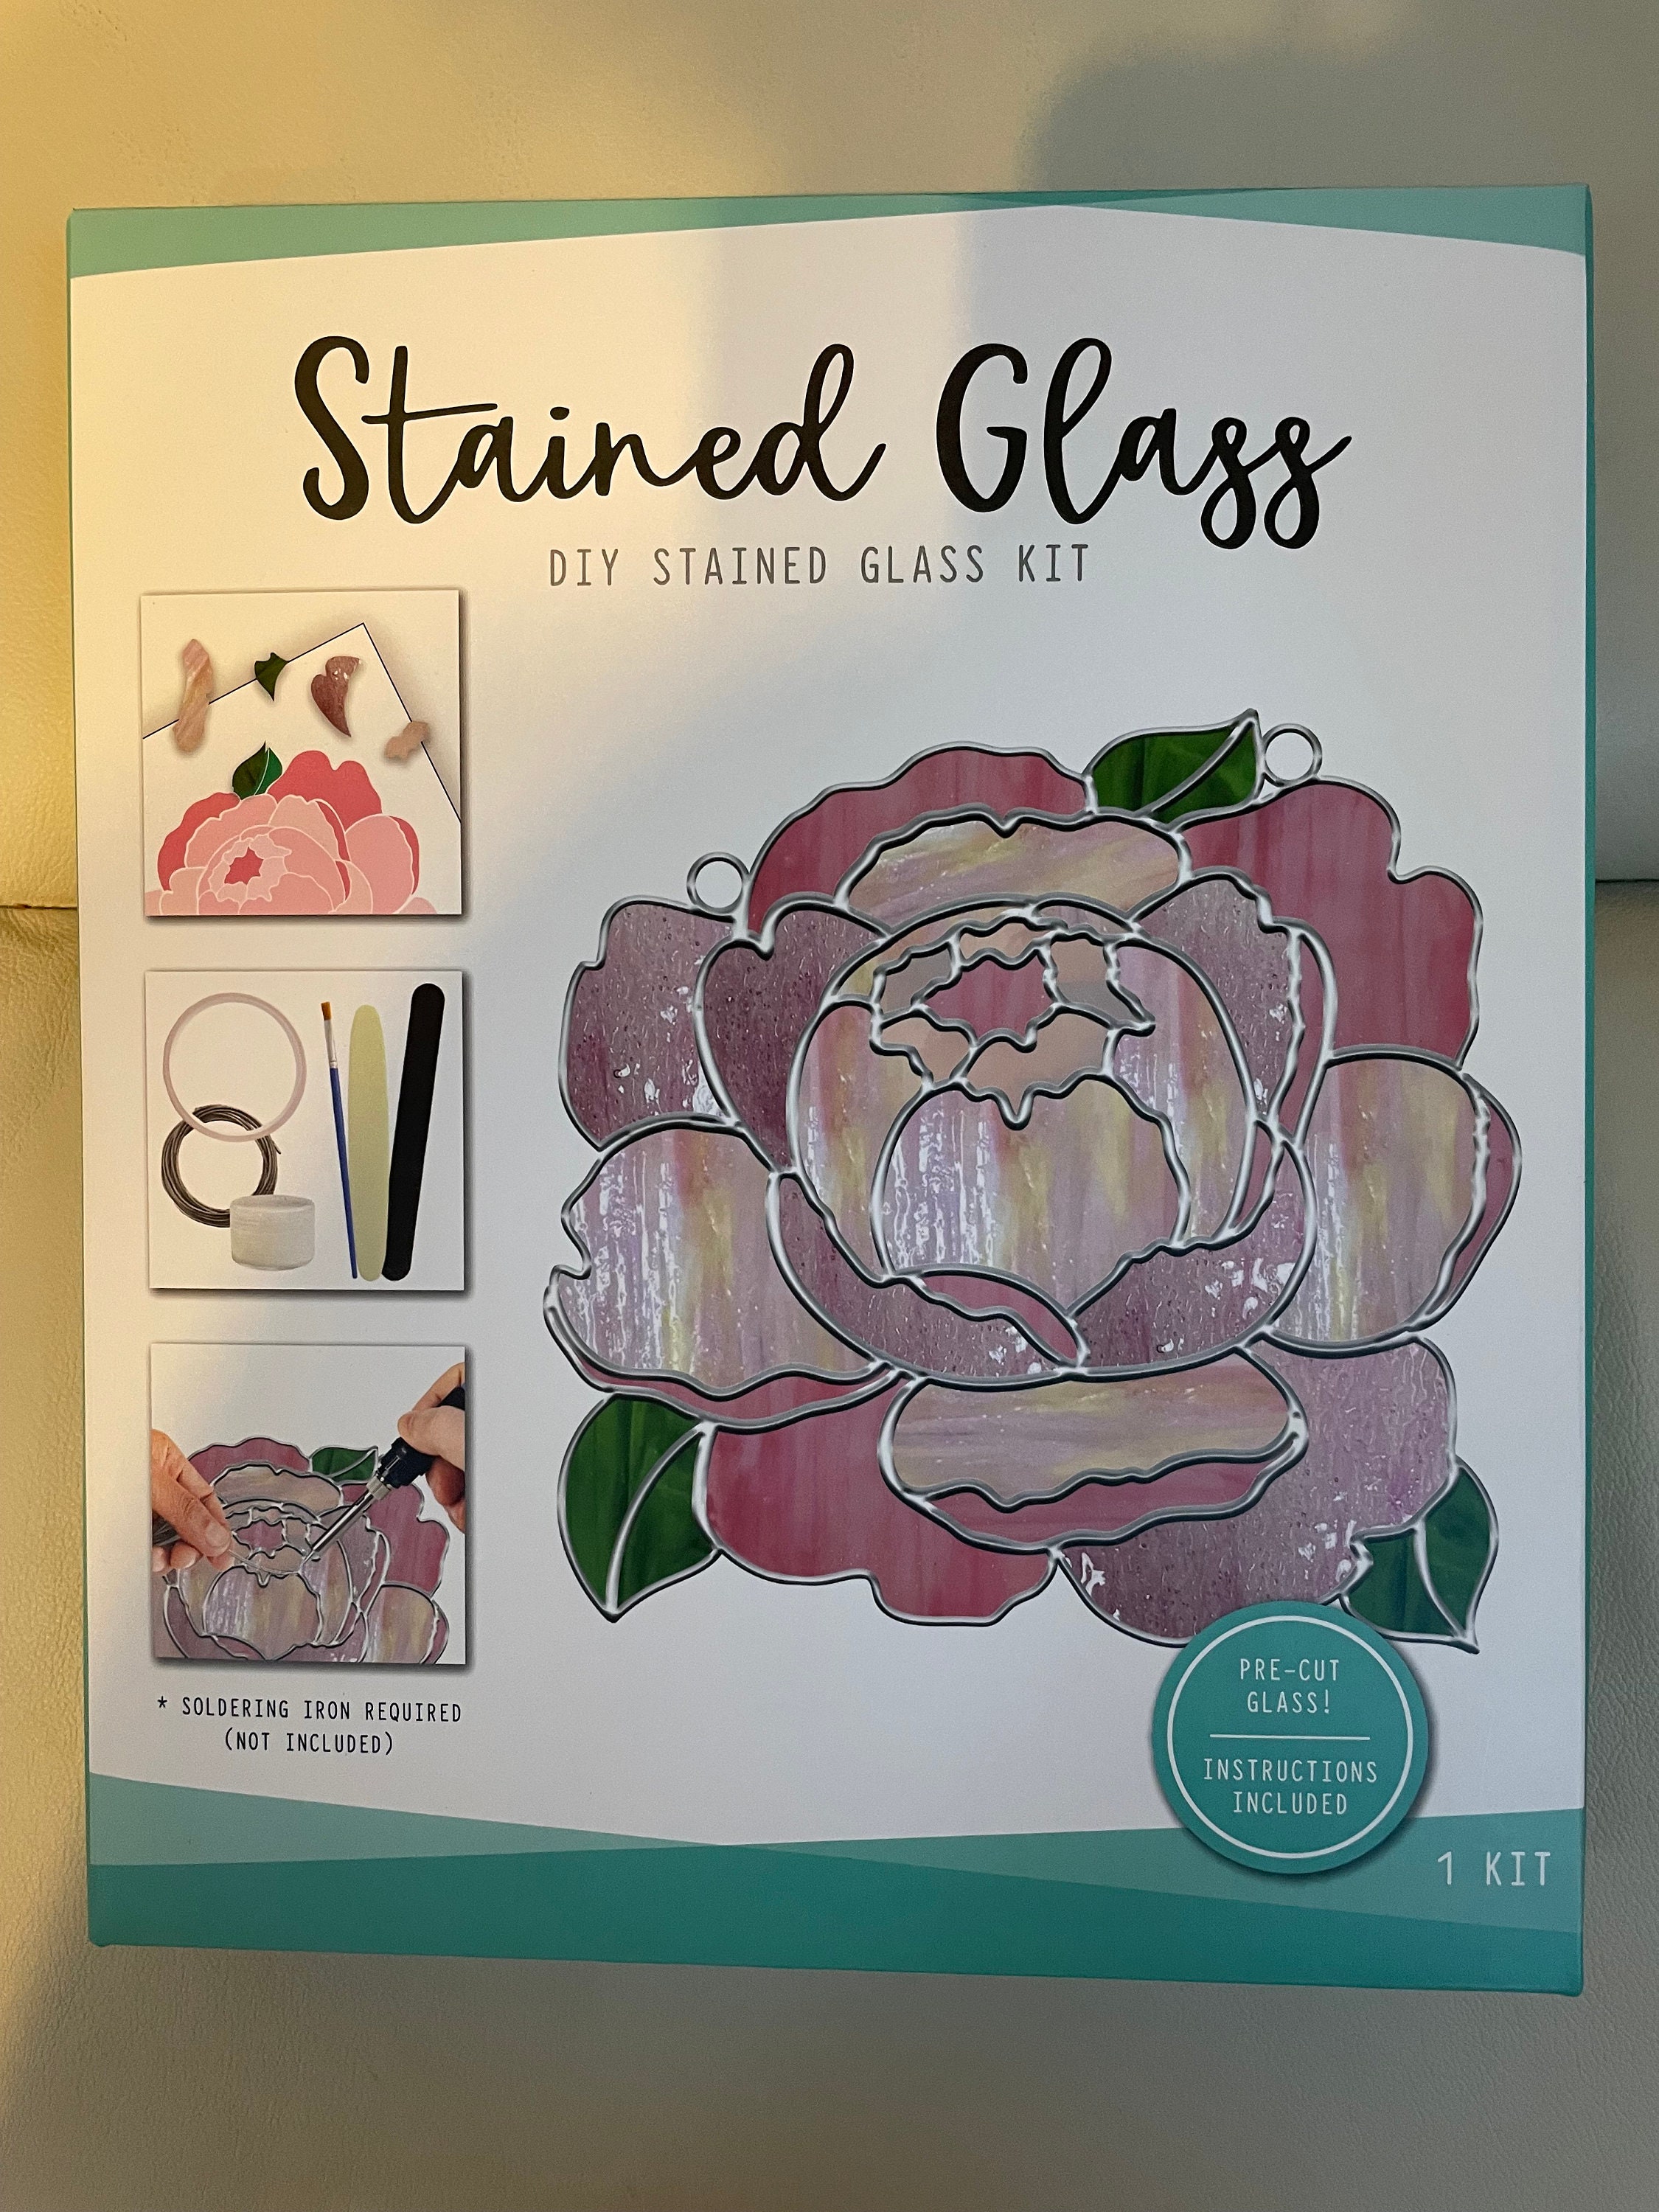 Stained Glass Start-up Kit for Stained Glass Beginners included